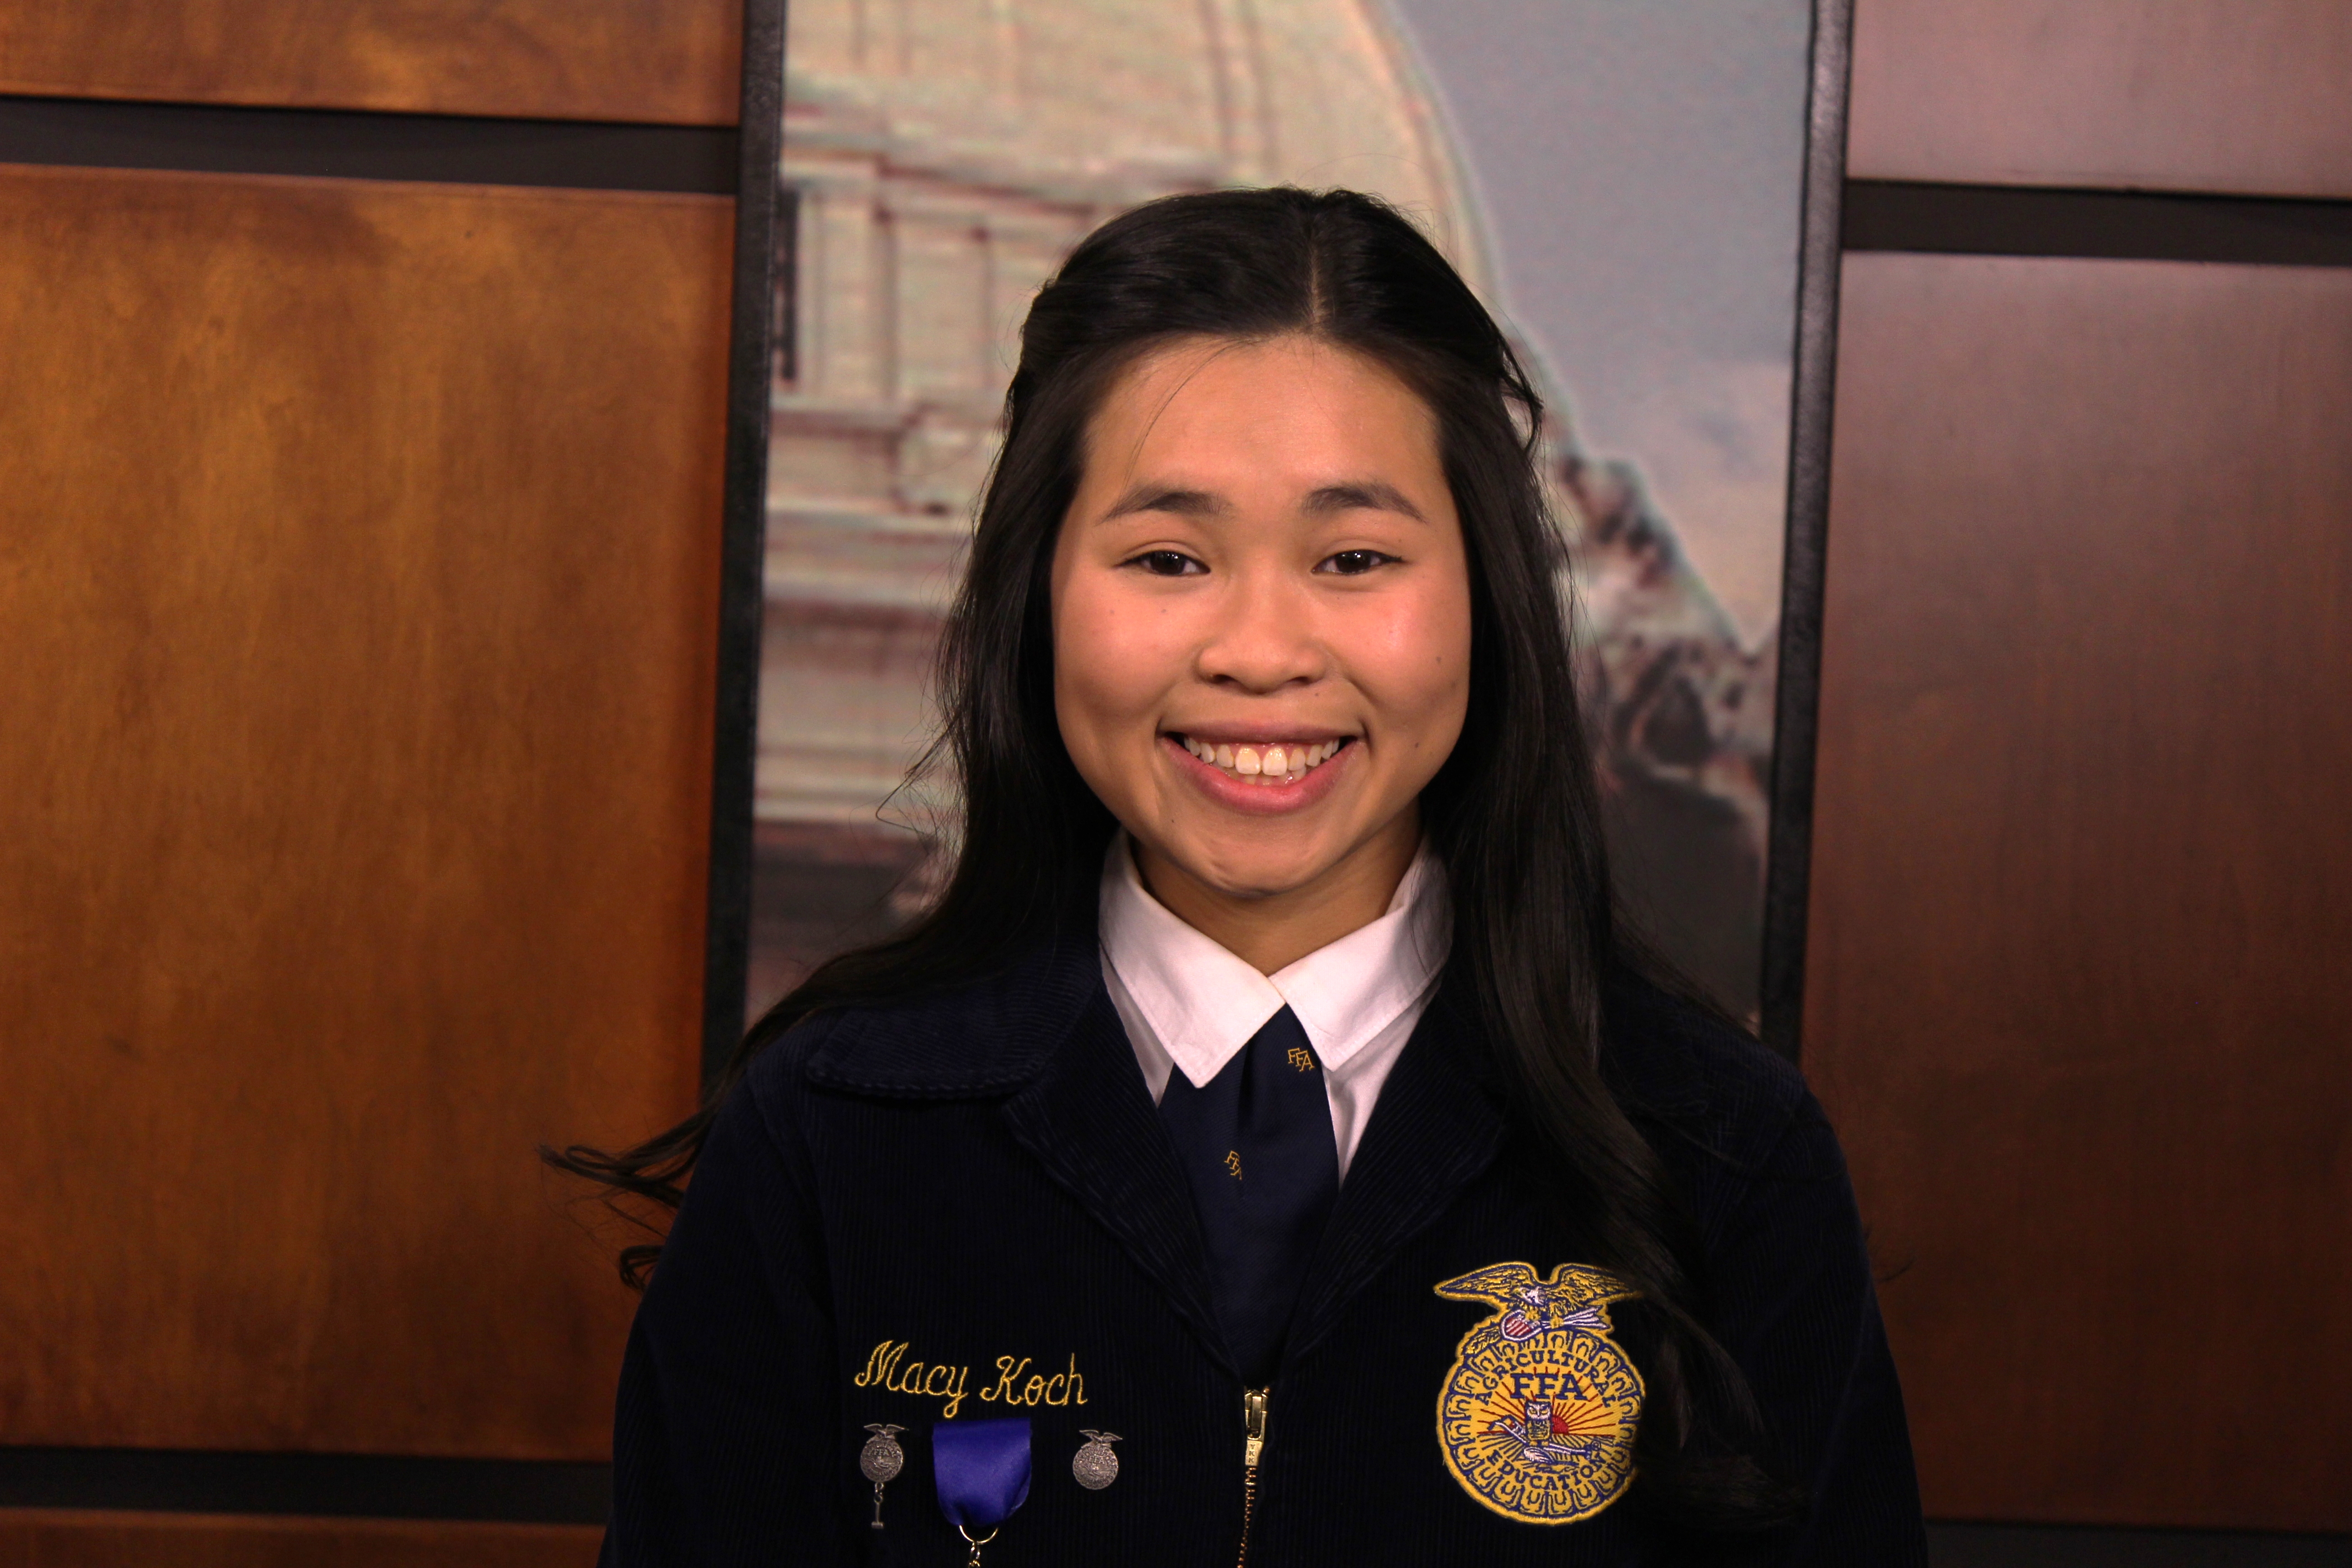 Introducing Macy Koch of the Perry FFA Chapter, Your 2022 Northwest Area Star in Agricultural Placement